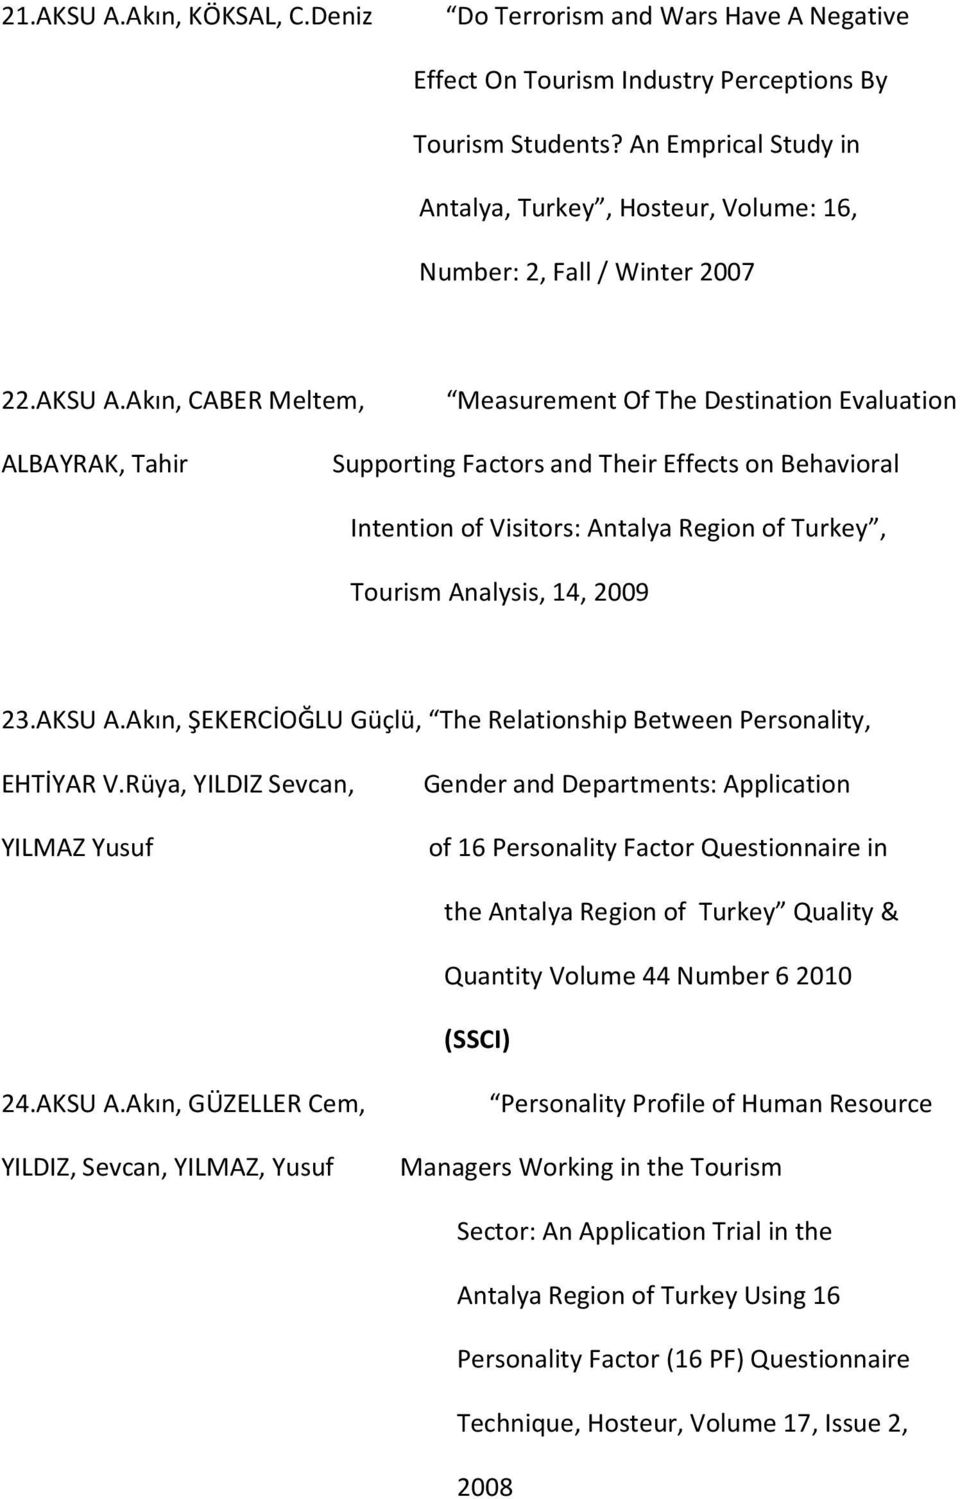 Akın, CABER Meltem, Measurement Of The Destination Evaluation ALBAYRAK, Tahir Supporting Factors and Their Effects on Behavioral Intention of Visitors: Antalya Region of Turkey, Tourism Analysis, 14,